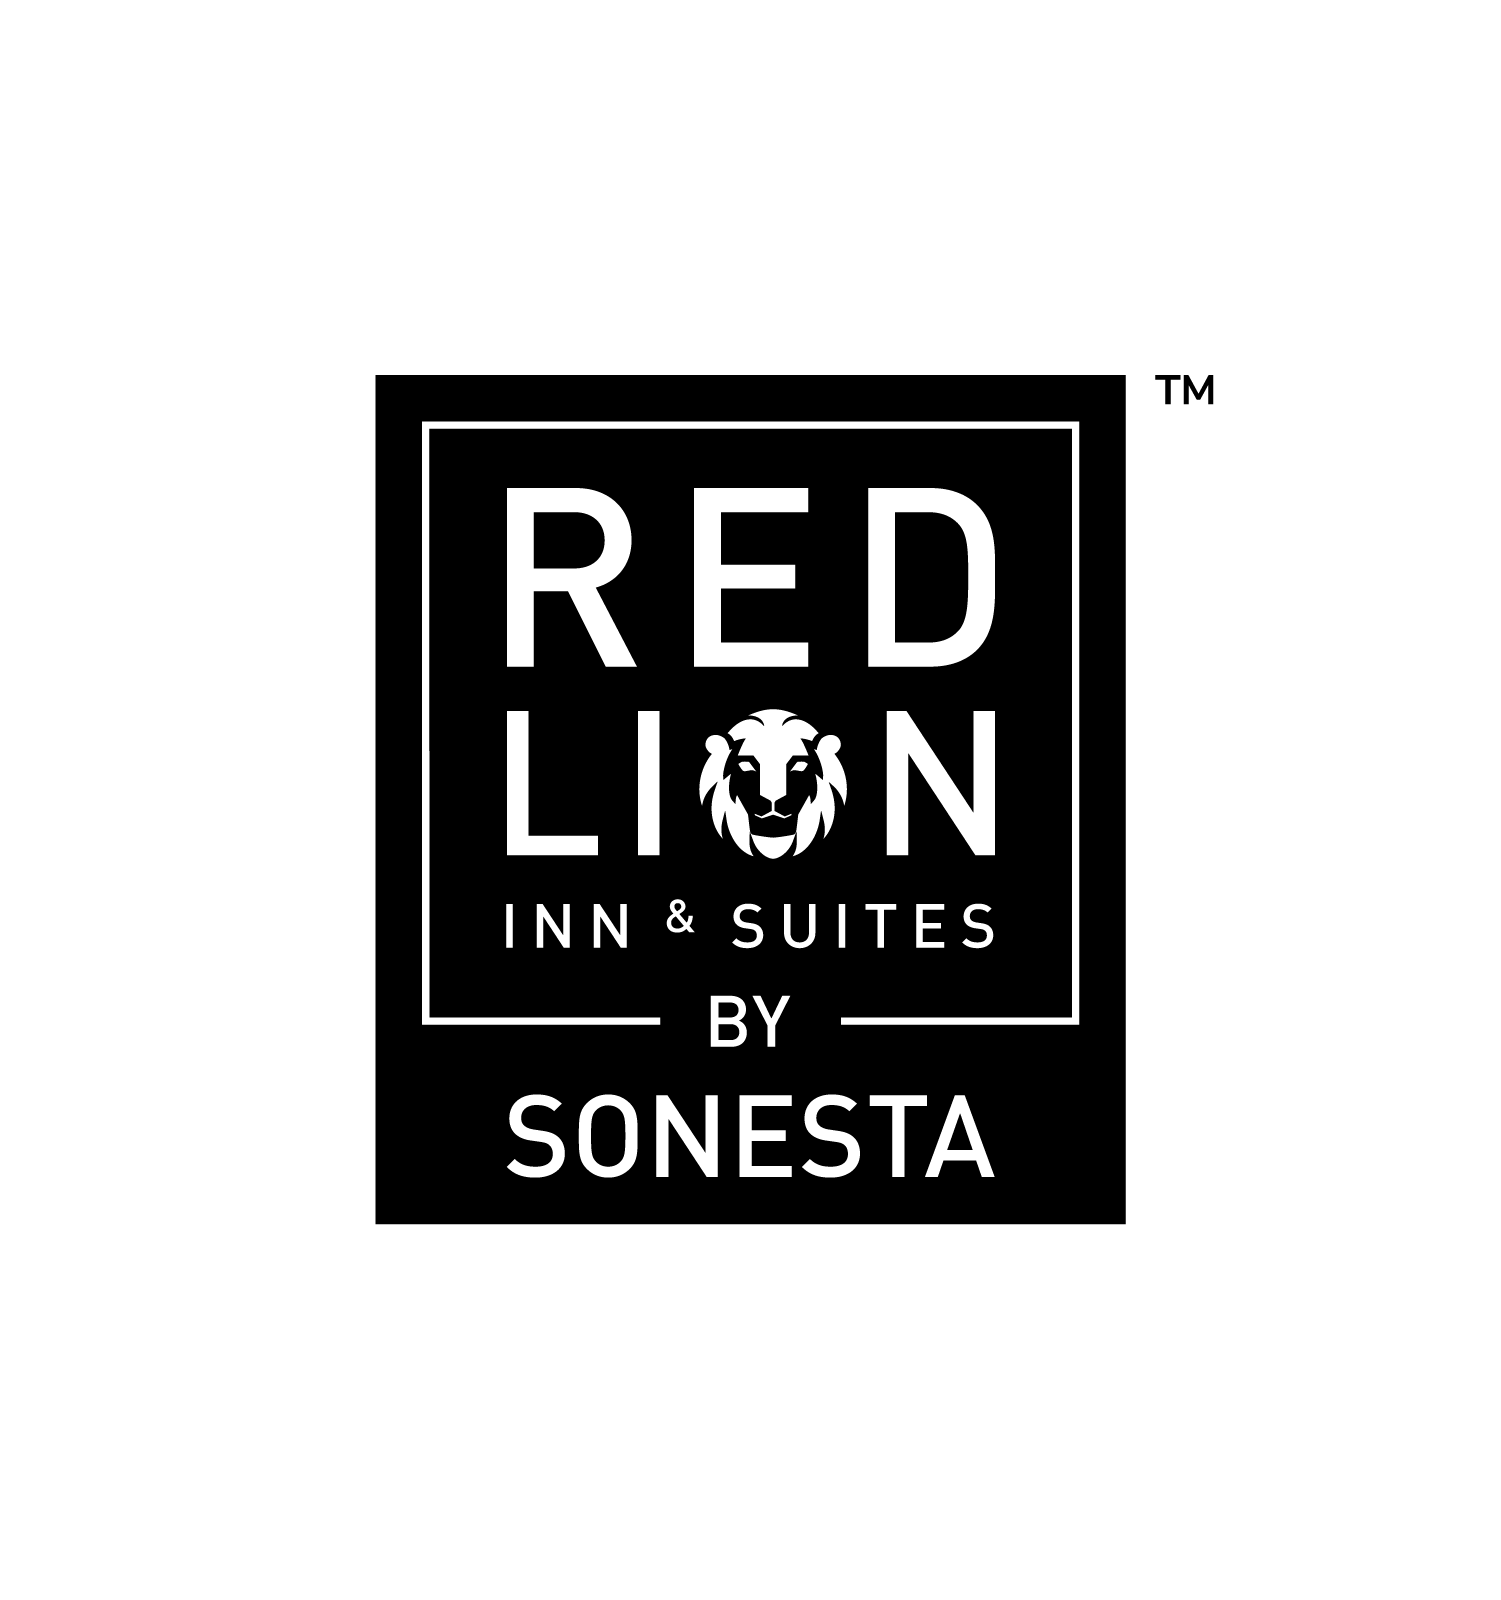 red lion inn and suites logo